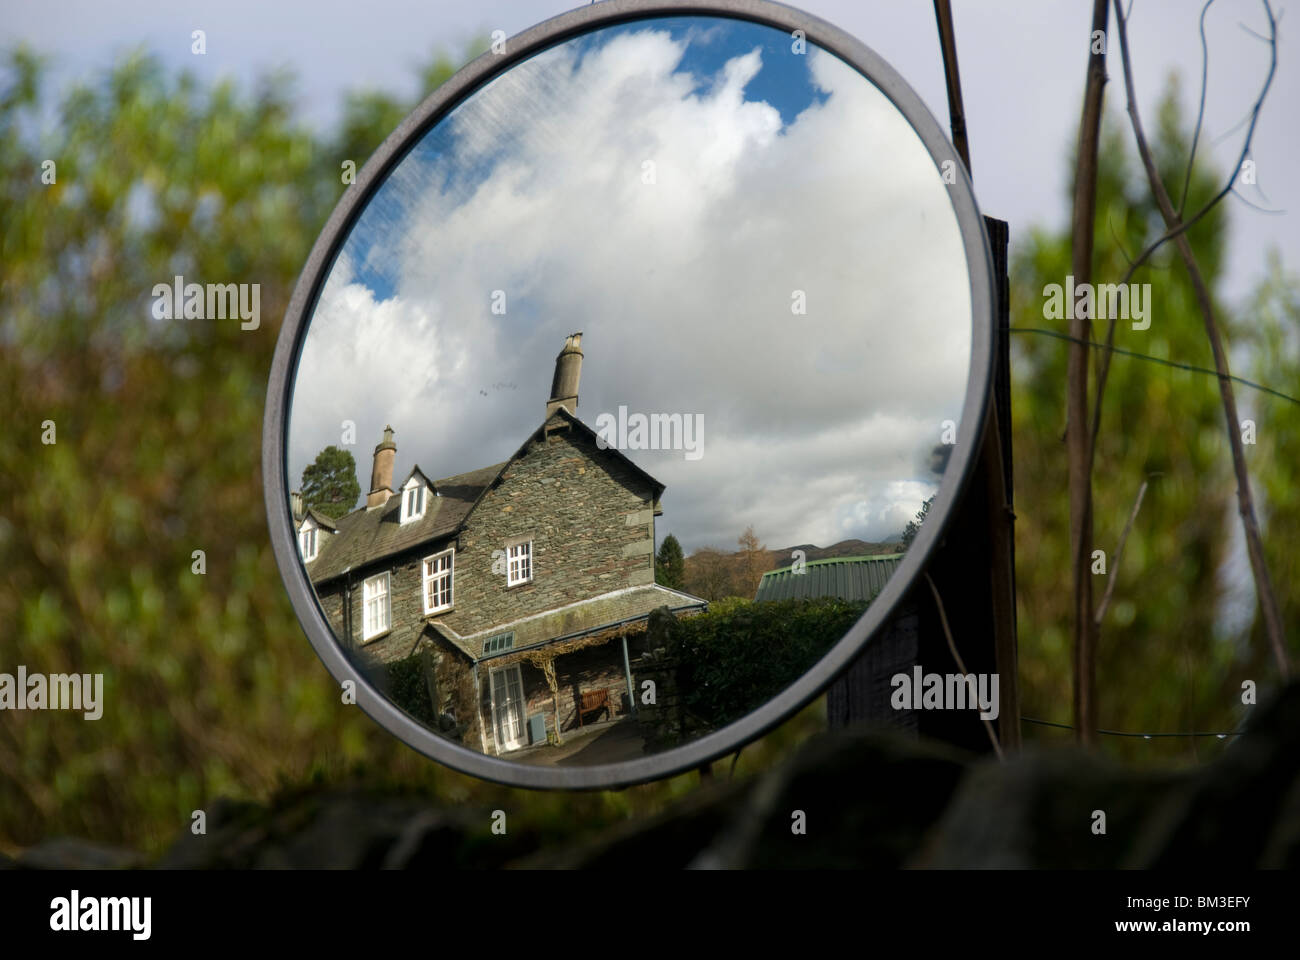 Reflection of a house in a convex traffic mirror, near Ambleside, Lake District, Cumbria England, UK Stock Photo